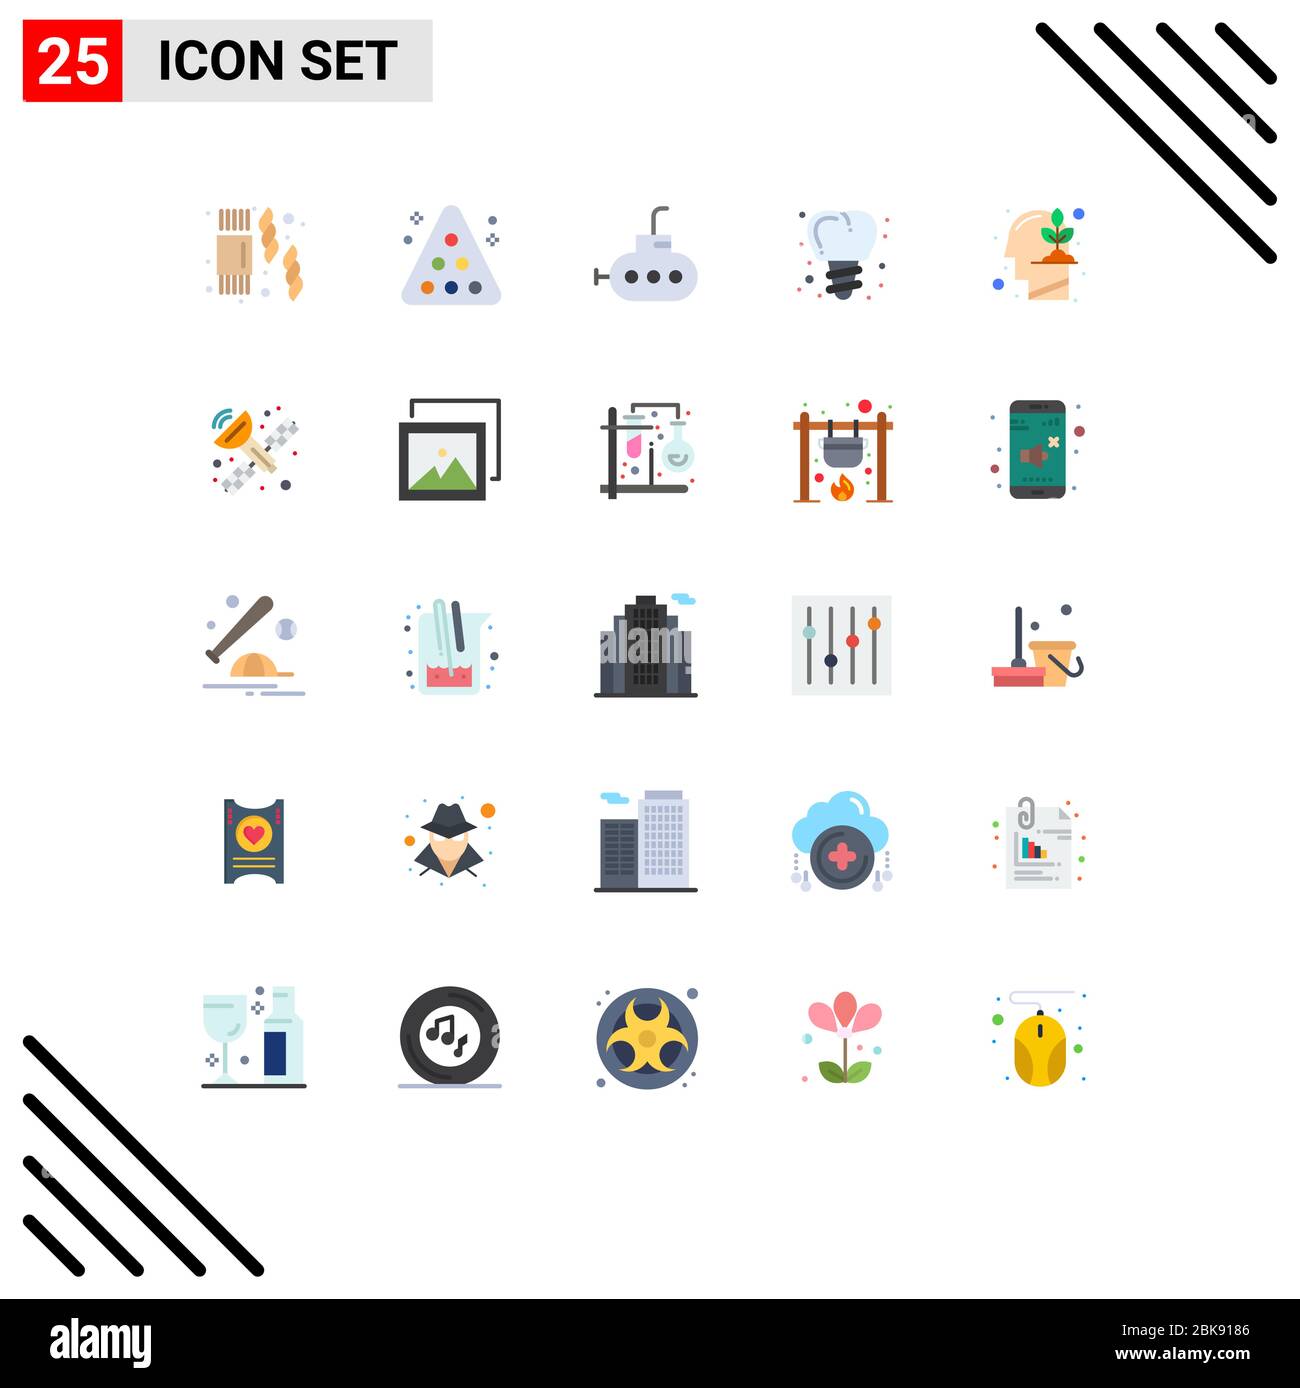 Modern Set of 25 Flat Colors and symbols such as communication, mind, bathyscaph, investment, tooth Editable Vector Design Elements Stock Vector